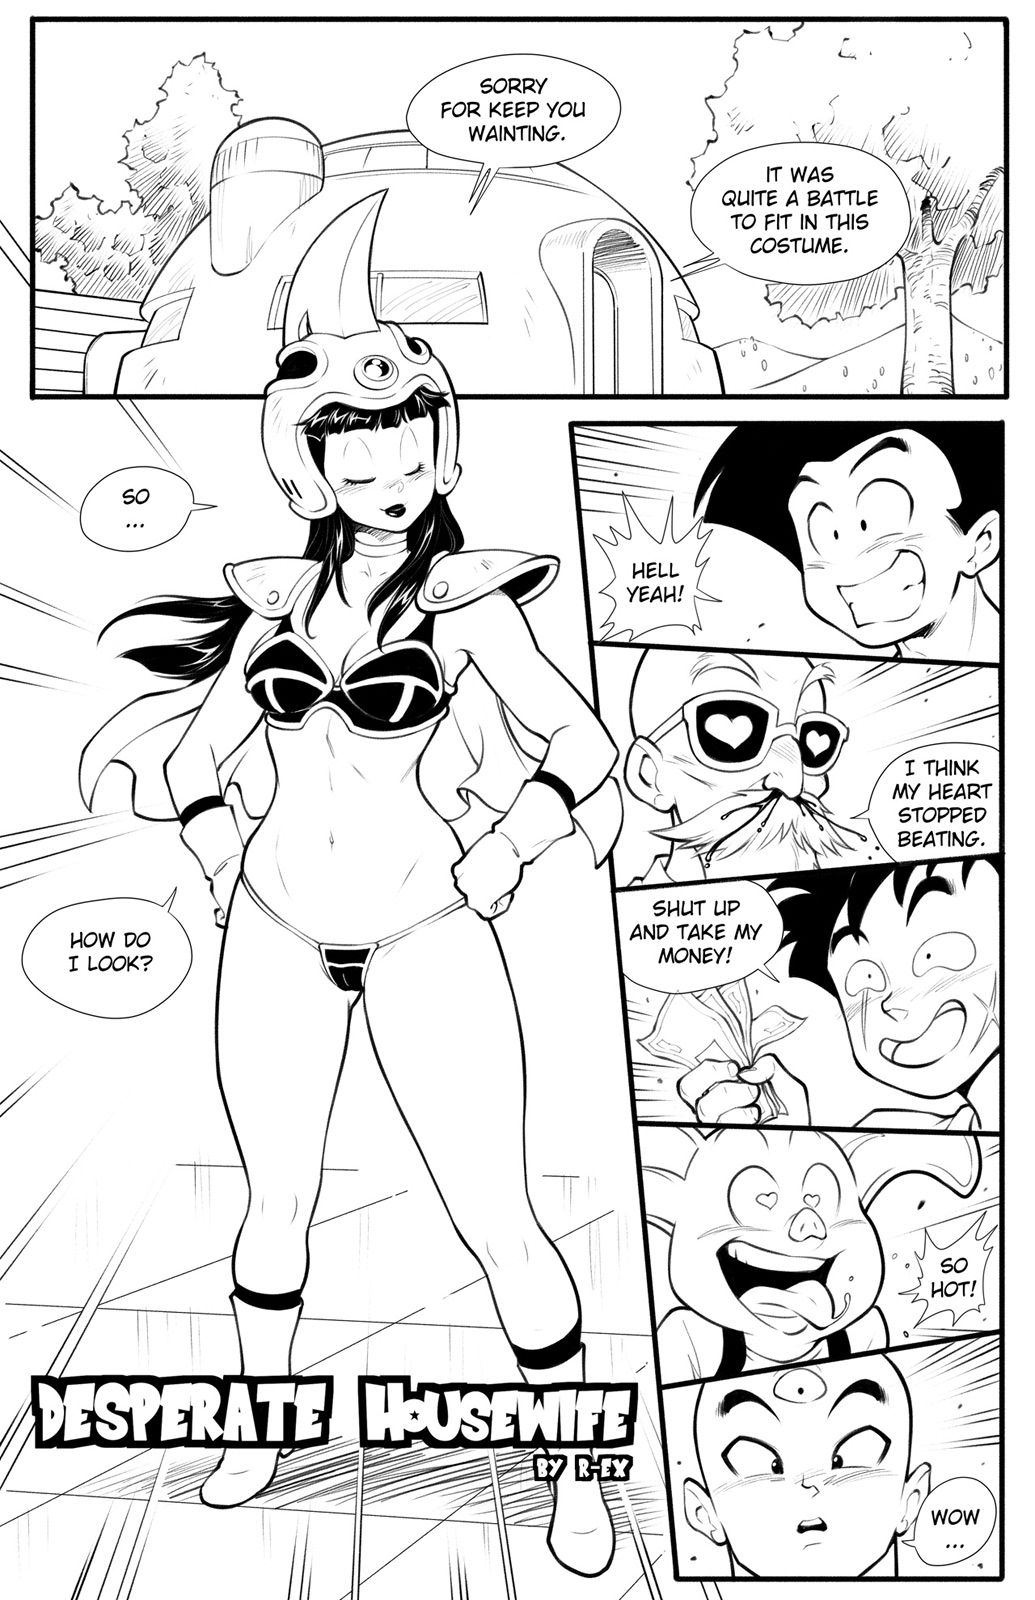 [r_ex] Desperate Housewife (Dragon Ball Z) [Ongoing] 3